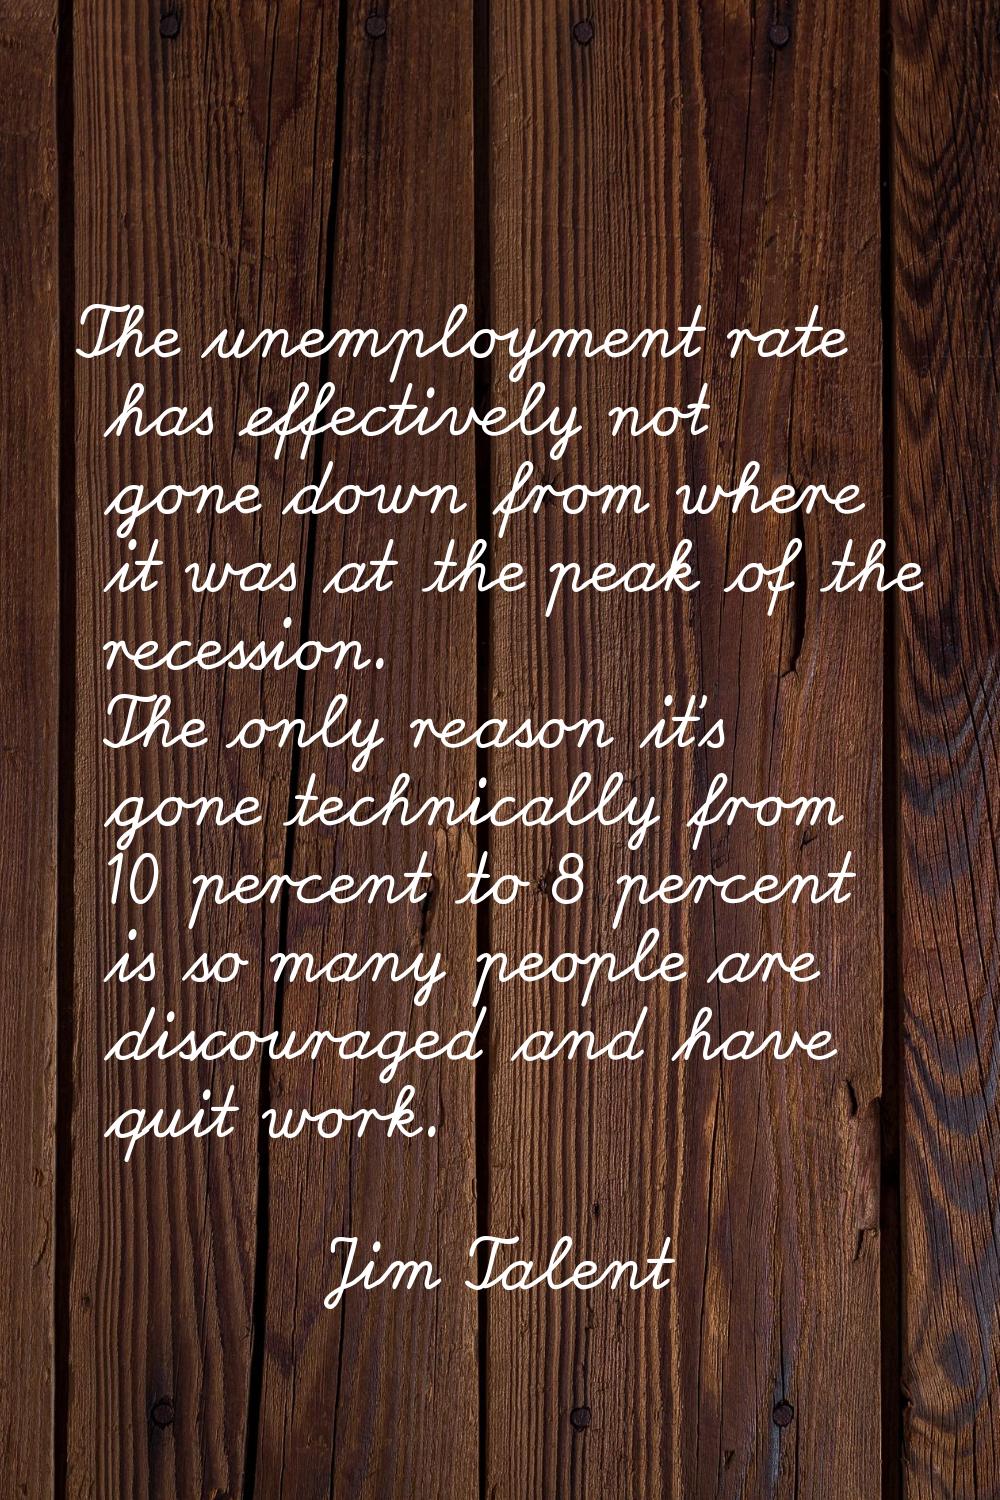 The unemployment rate has effectively not gone down from where it was at the peak of the recession.